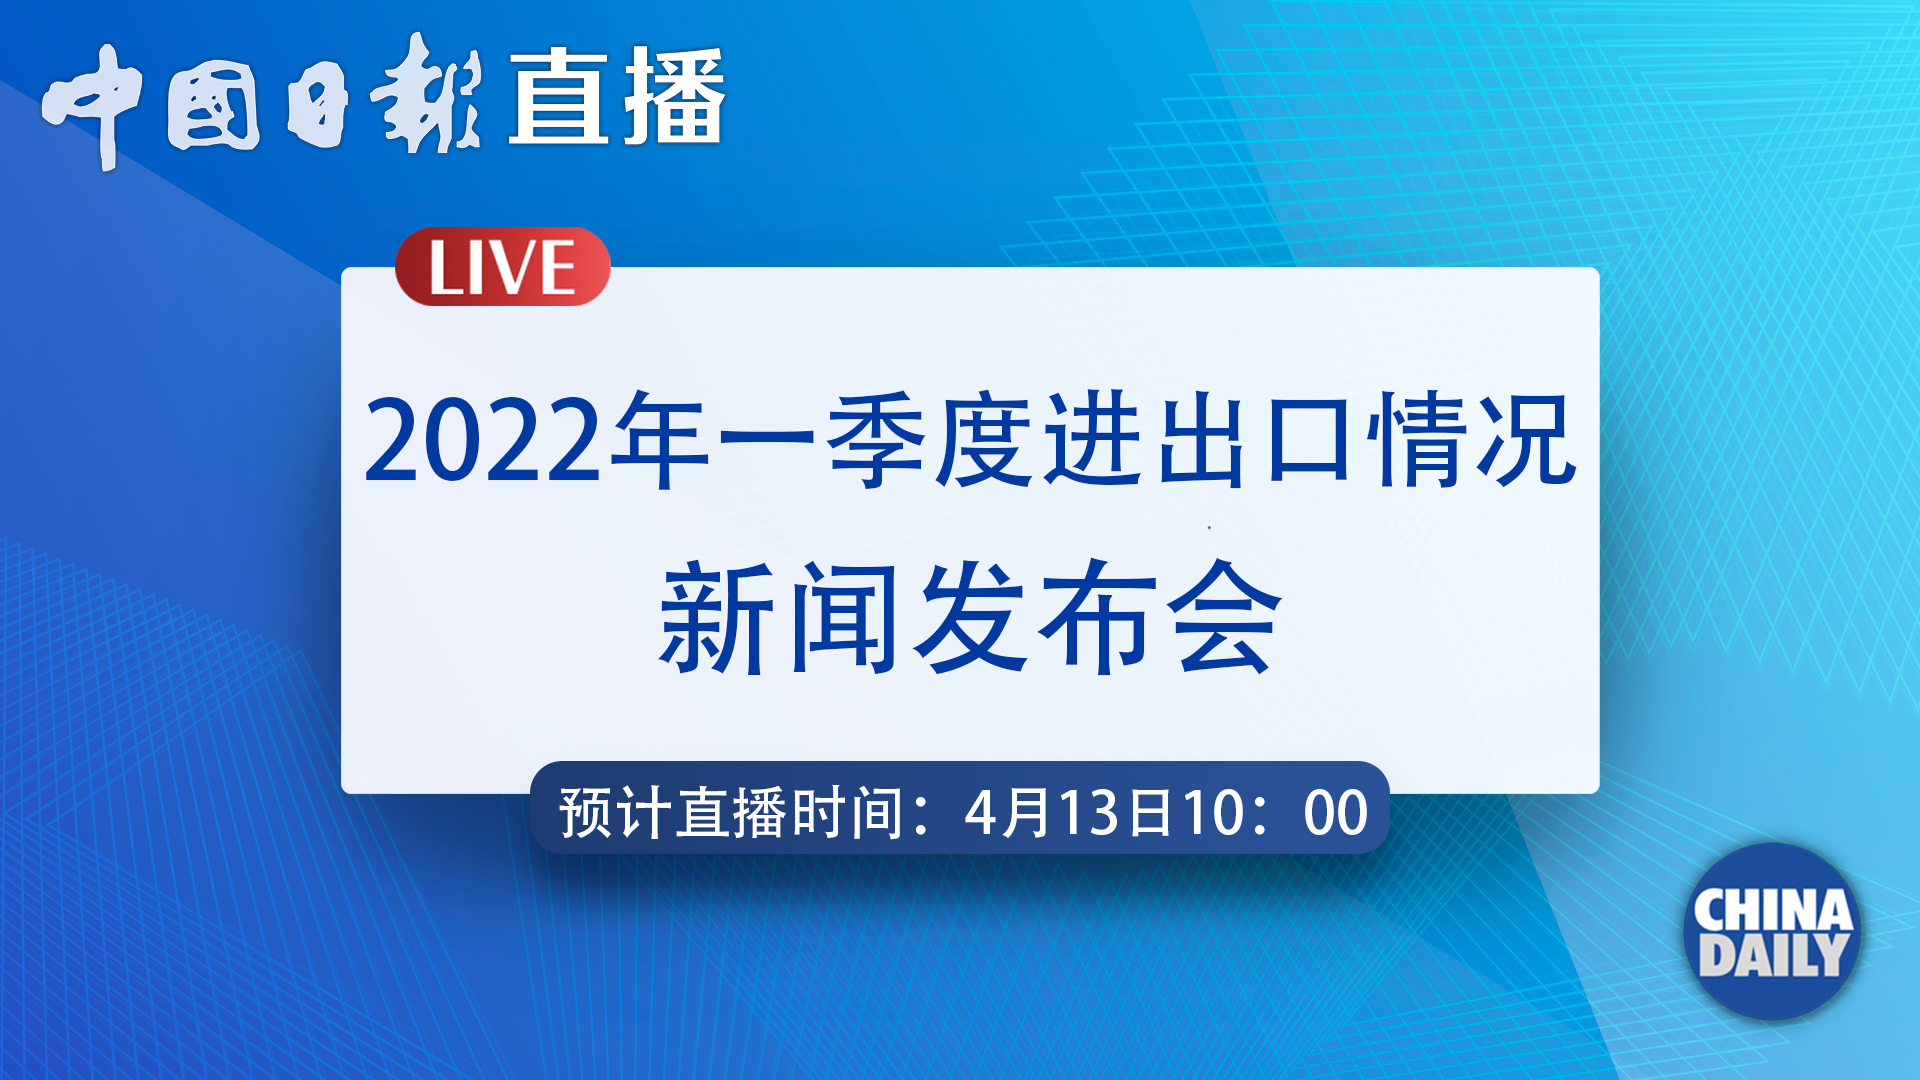 Watch it again: SCIO holds a press conference on China's foreign trade of Q1 of 2022